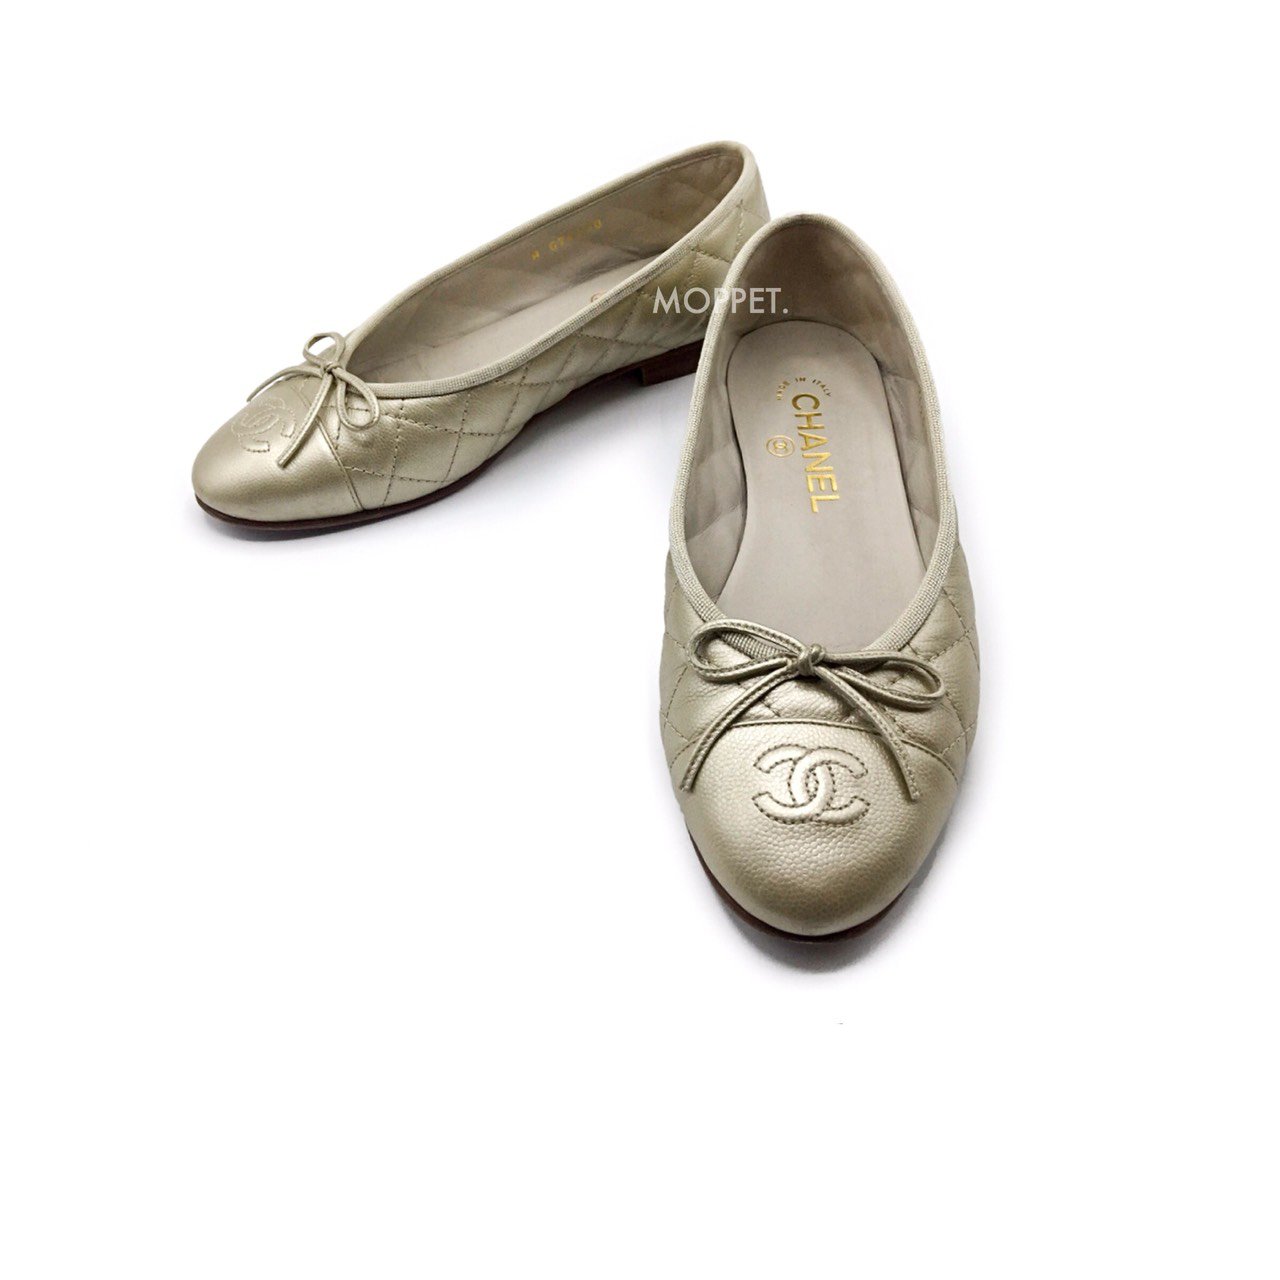 Used Chanel Flat Shoes 37 in Light Gold Leather